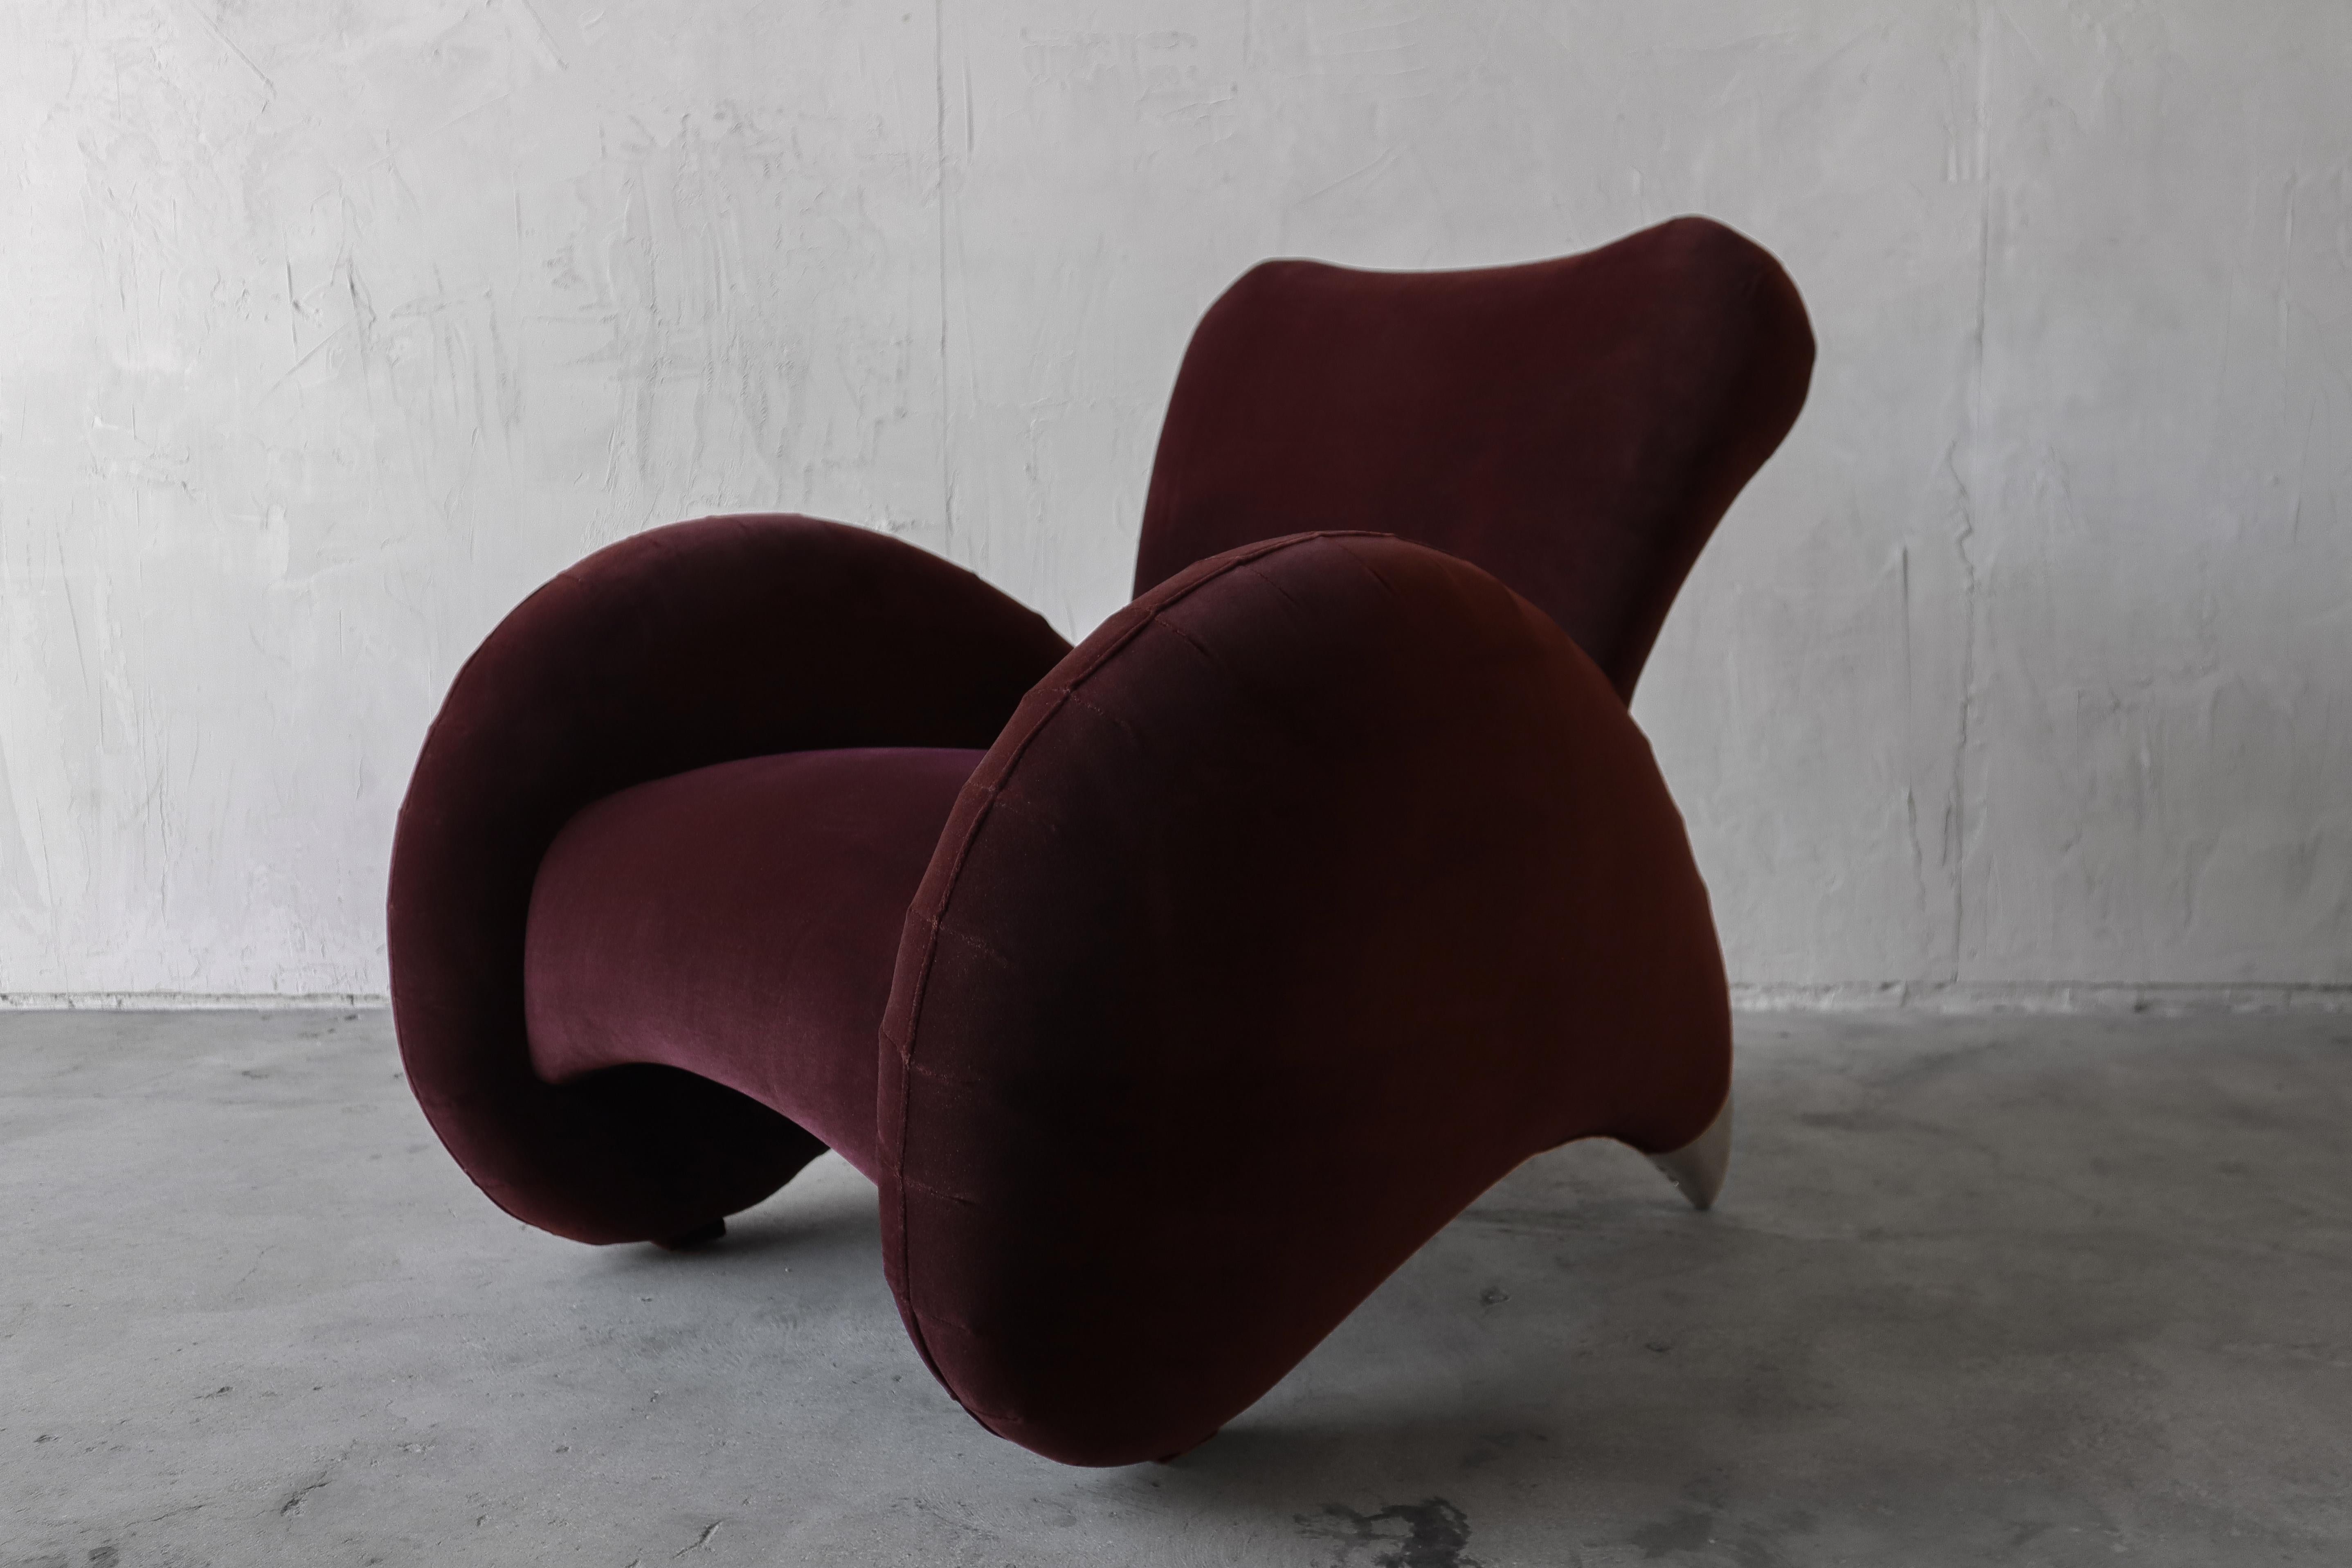 If you've been looking for an incredible, sculptural lounge chair that will be the center of attention, look no further. This chair is big on style and size, a truly gorgeous piece, that's ready to command the attention it deserves. The lines and